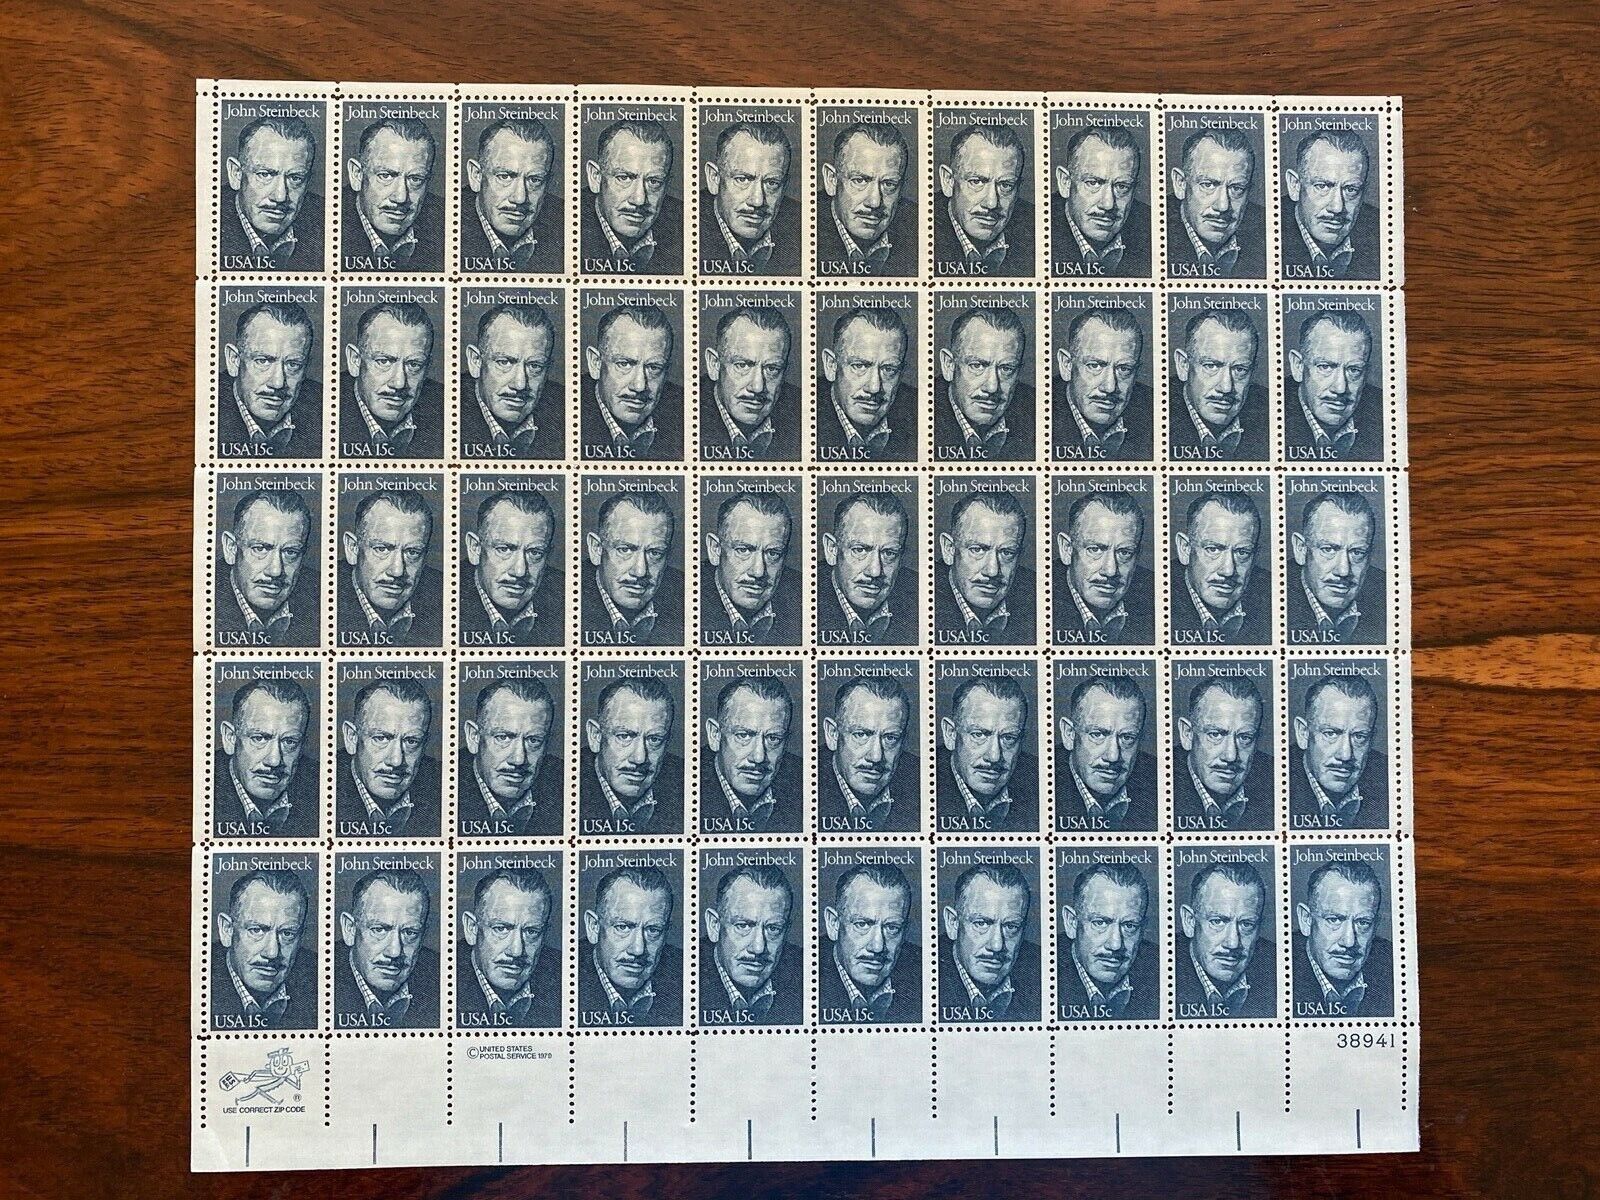 #1773 1979 15ct JOHN OG MNH STEINBECK At the price Indianapolis Mall